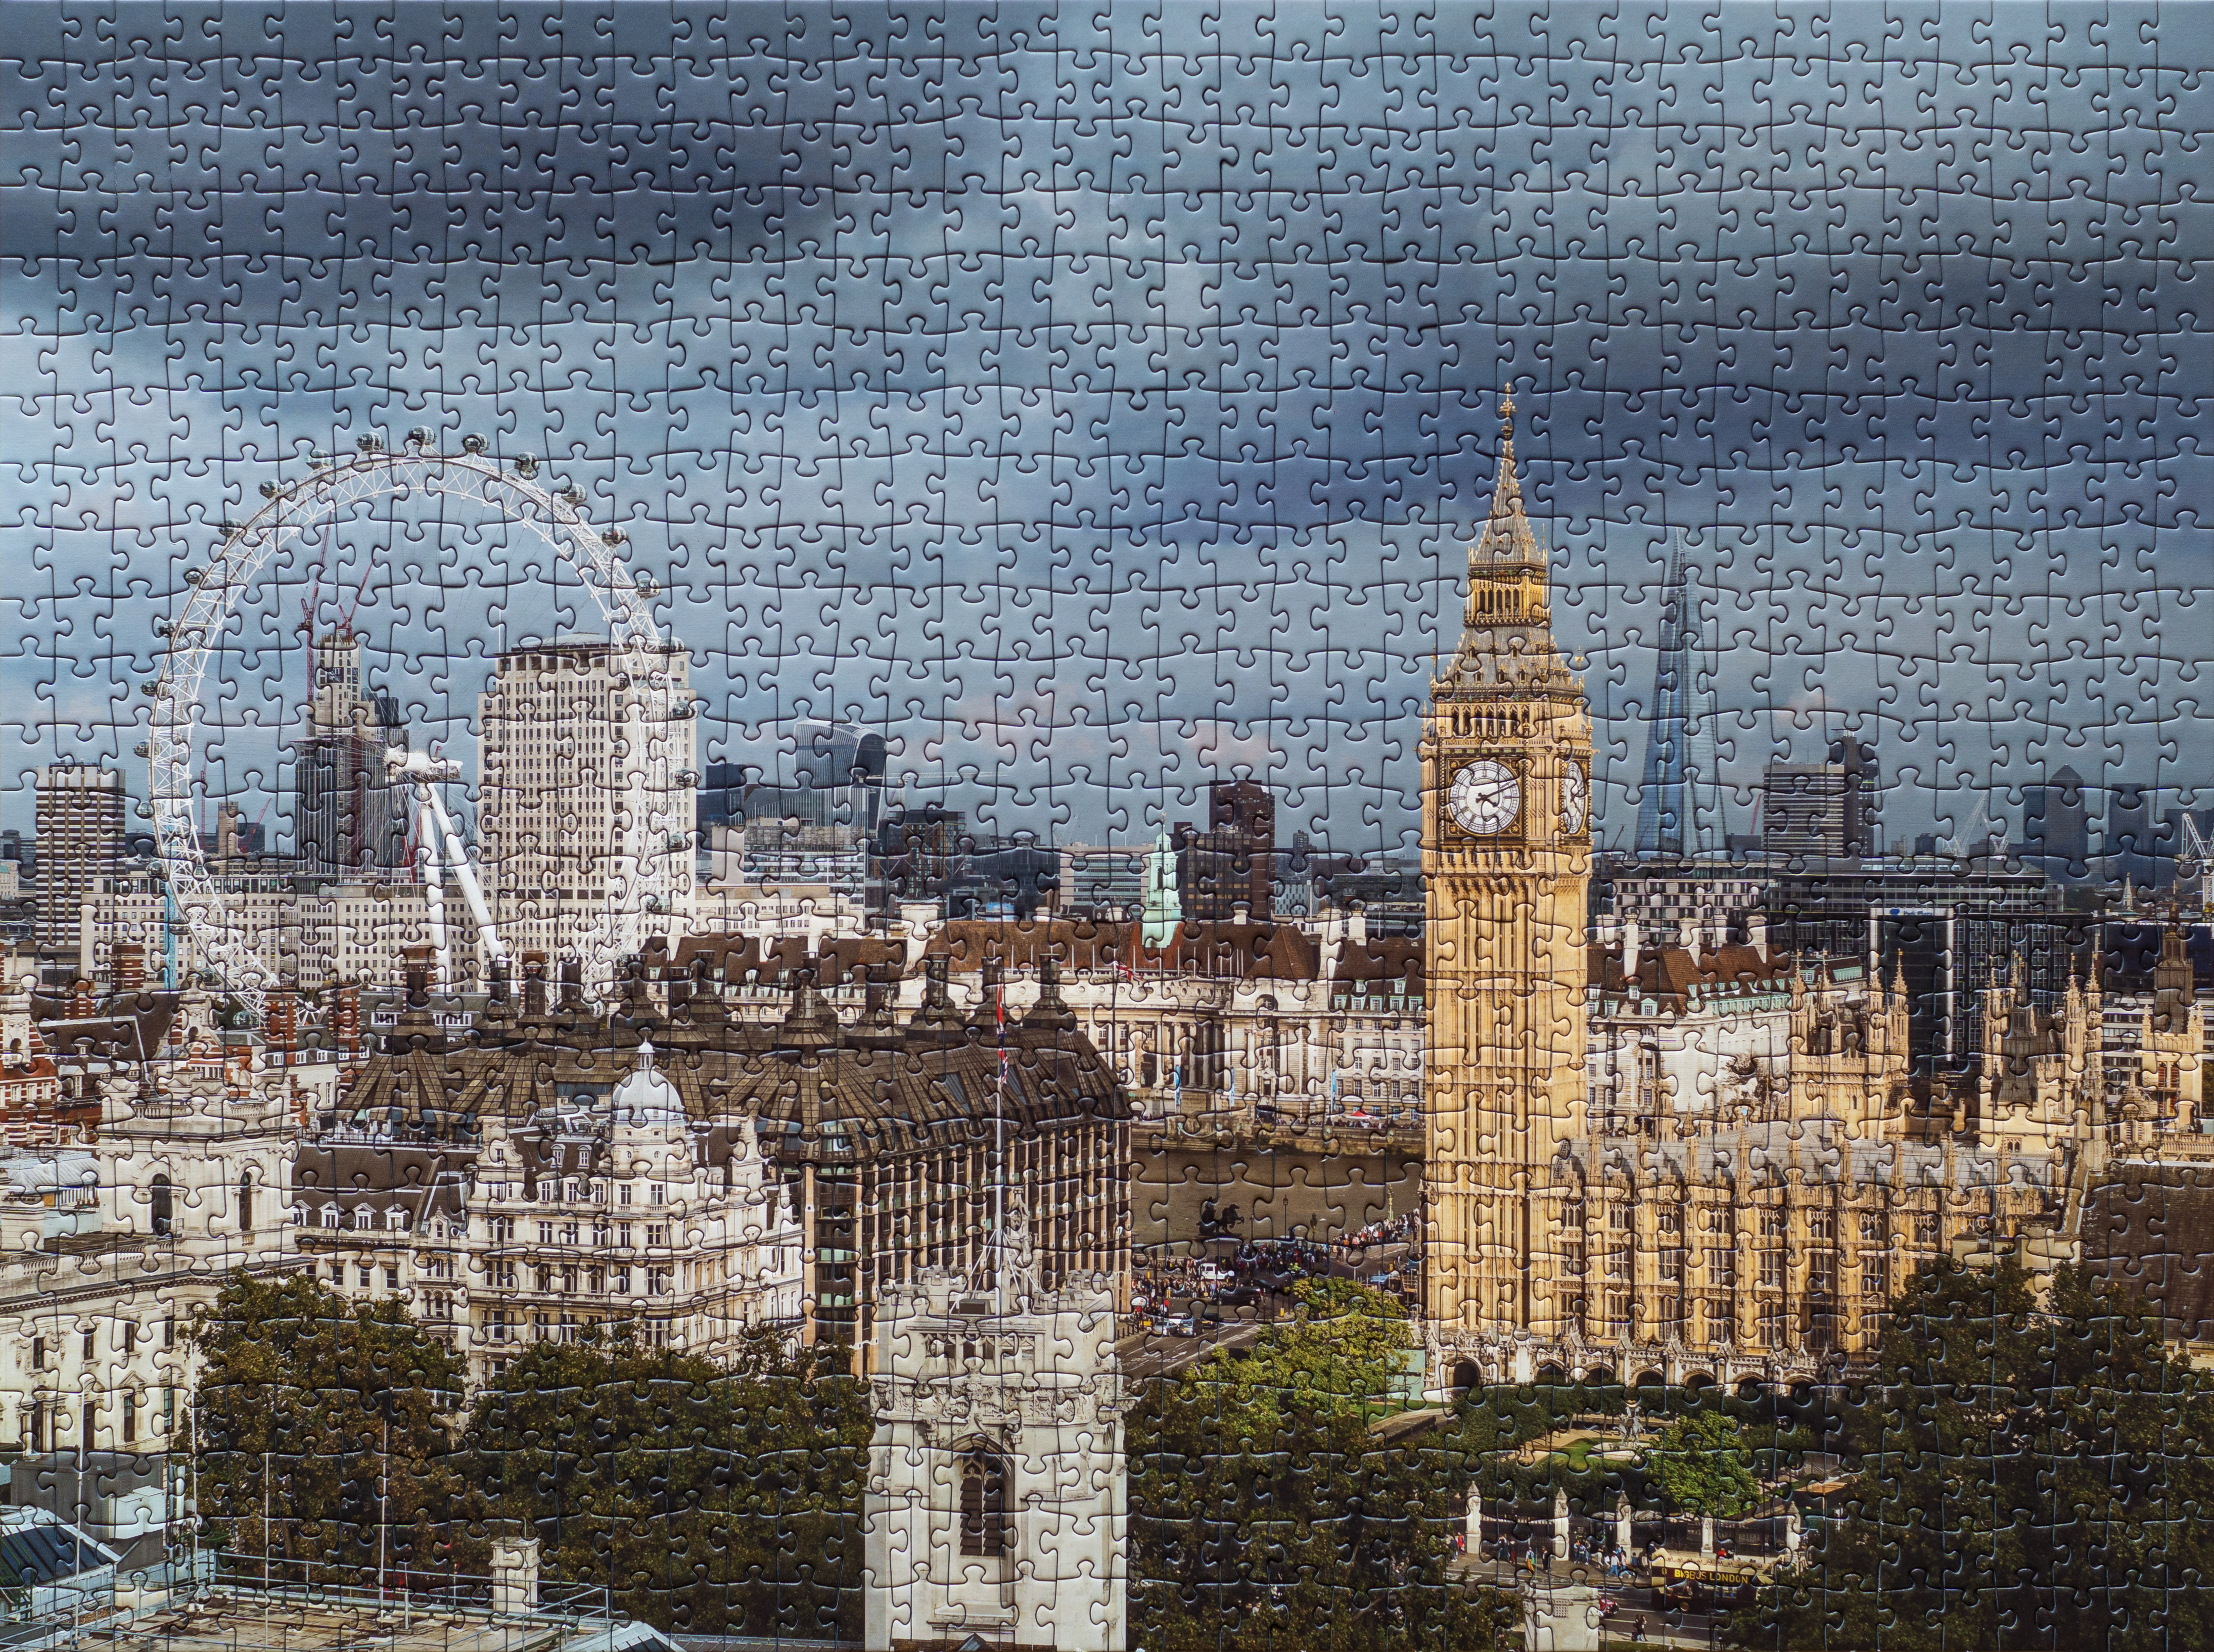 A 1000 piece jigsaw puzzle: Palace of Westminster from the dome on Methodist Central Hall by User:Colin